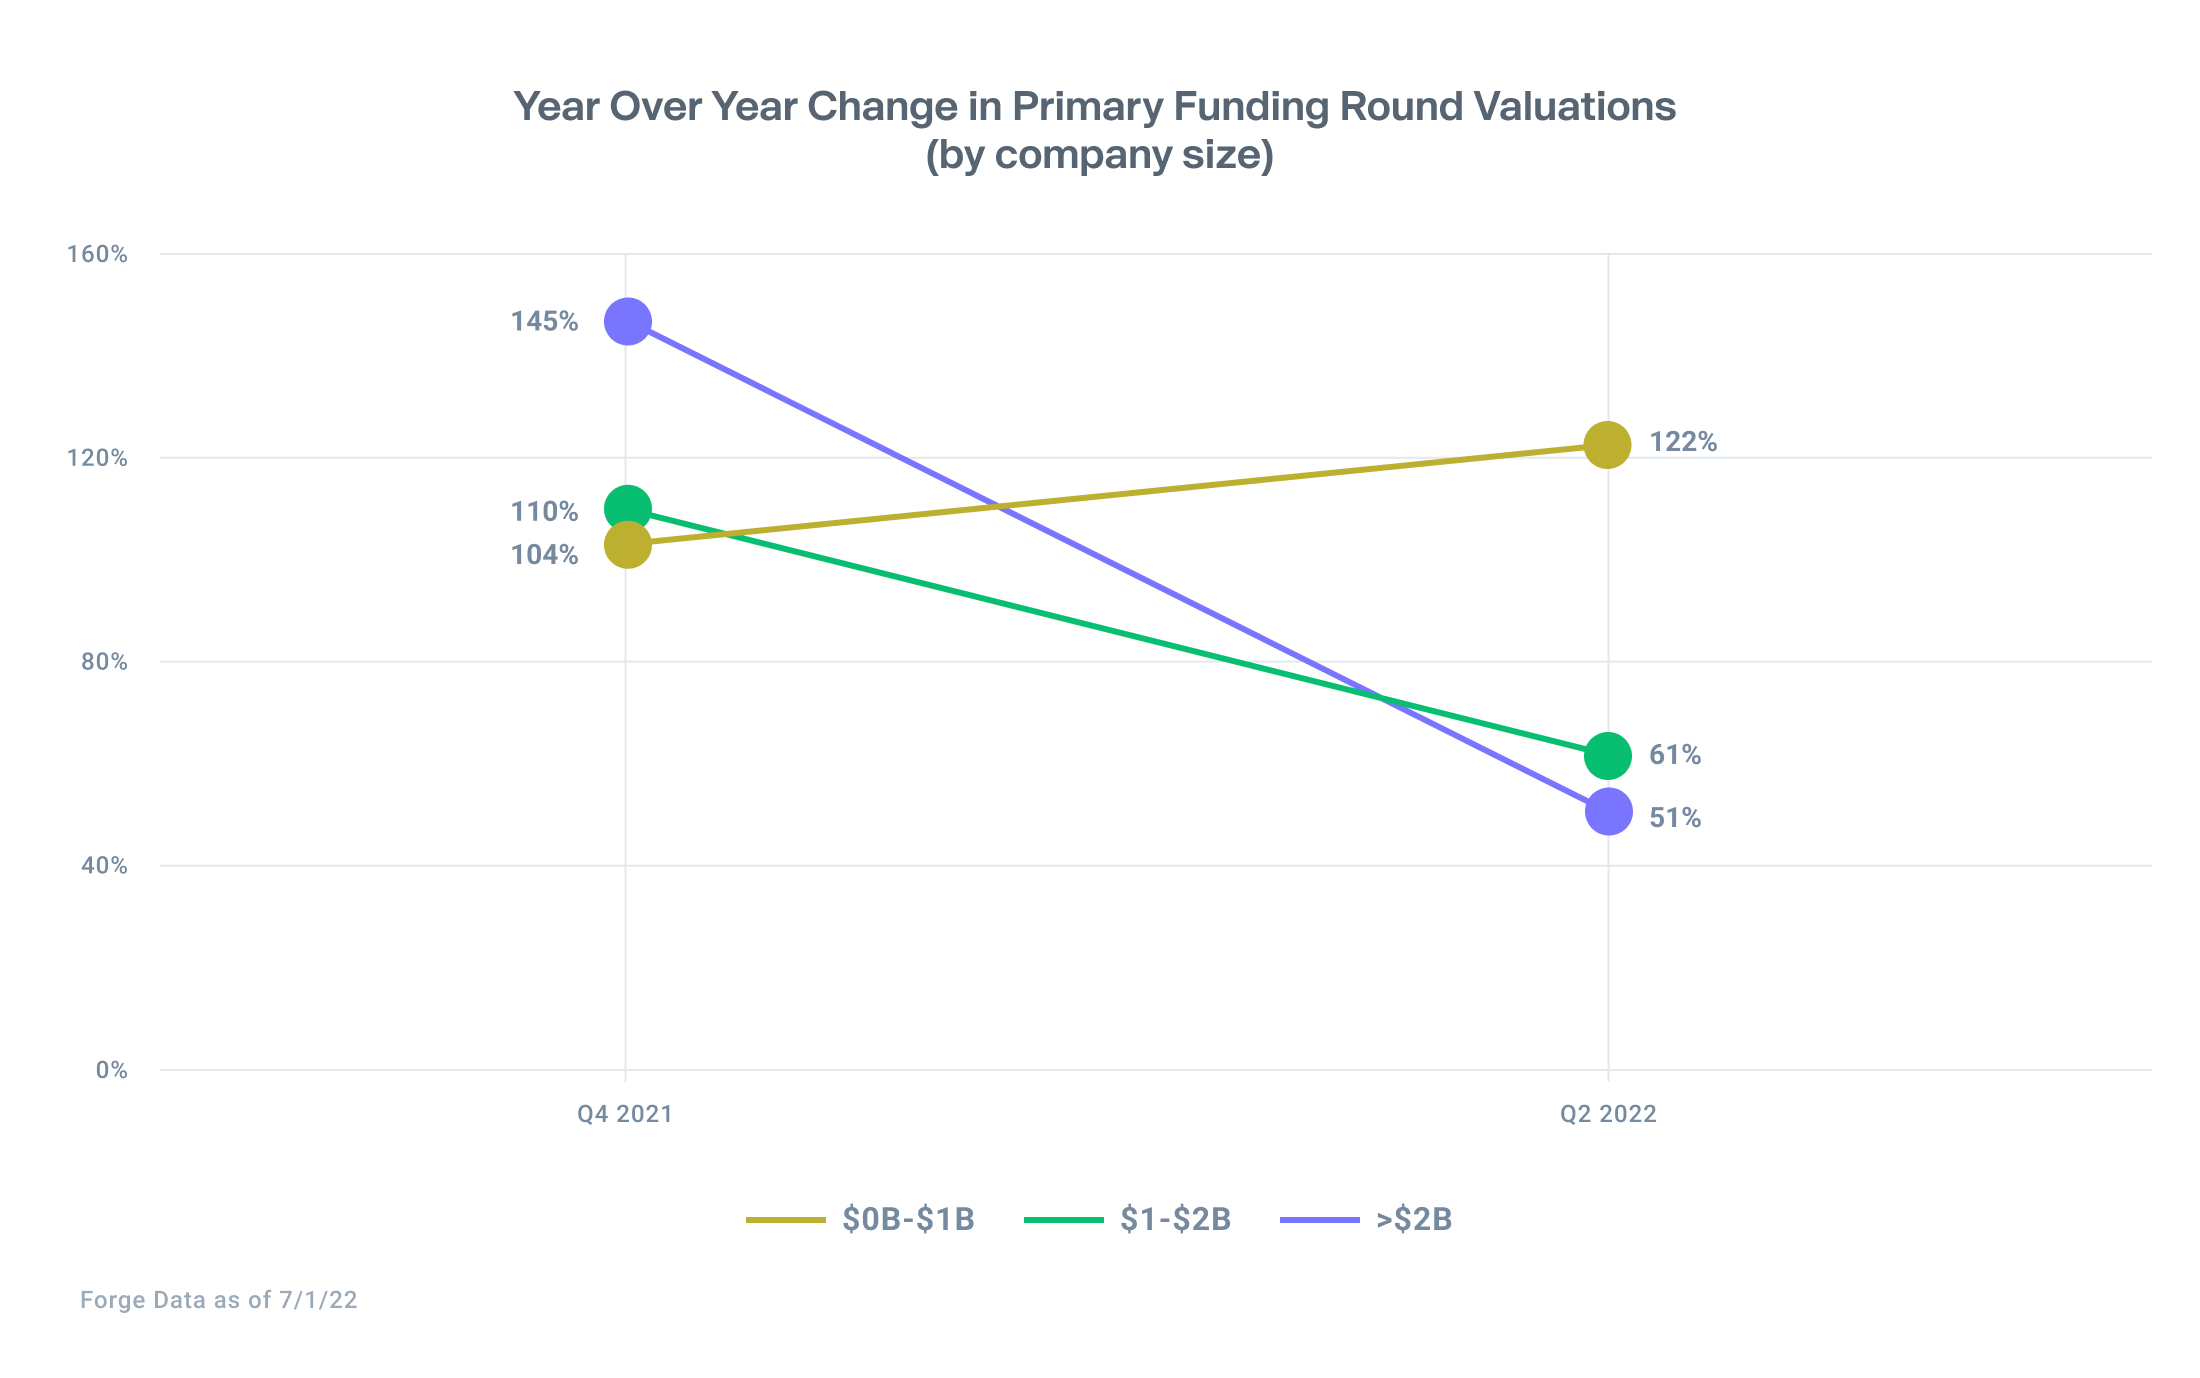 Line chart shows Year of Year change in the primary funding round valuations by company size